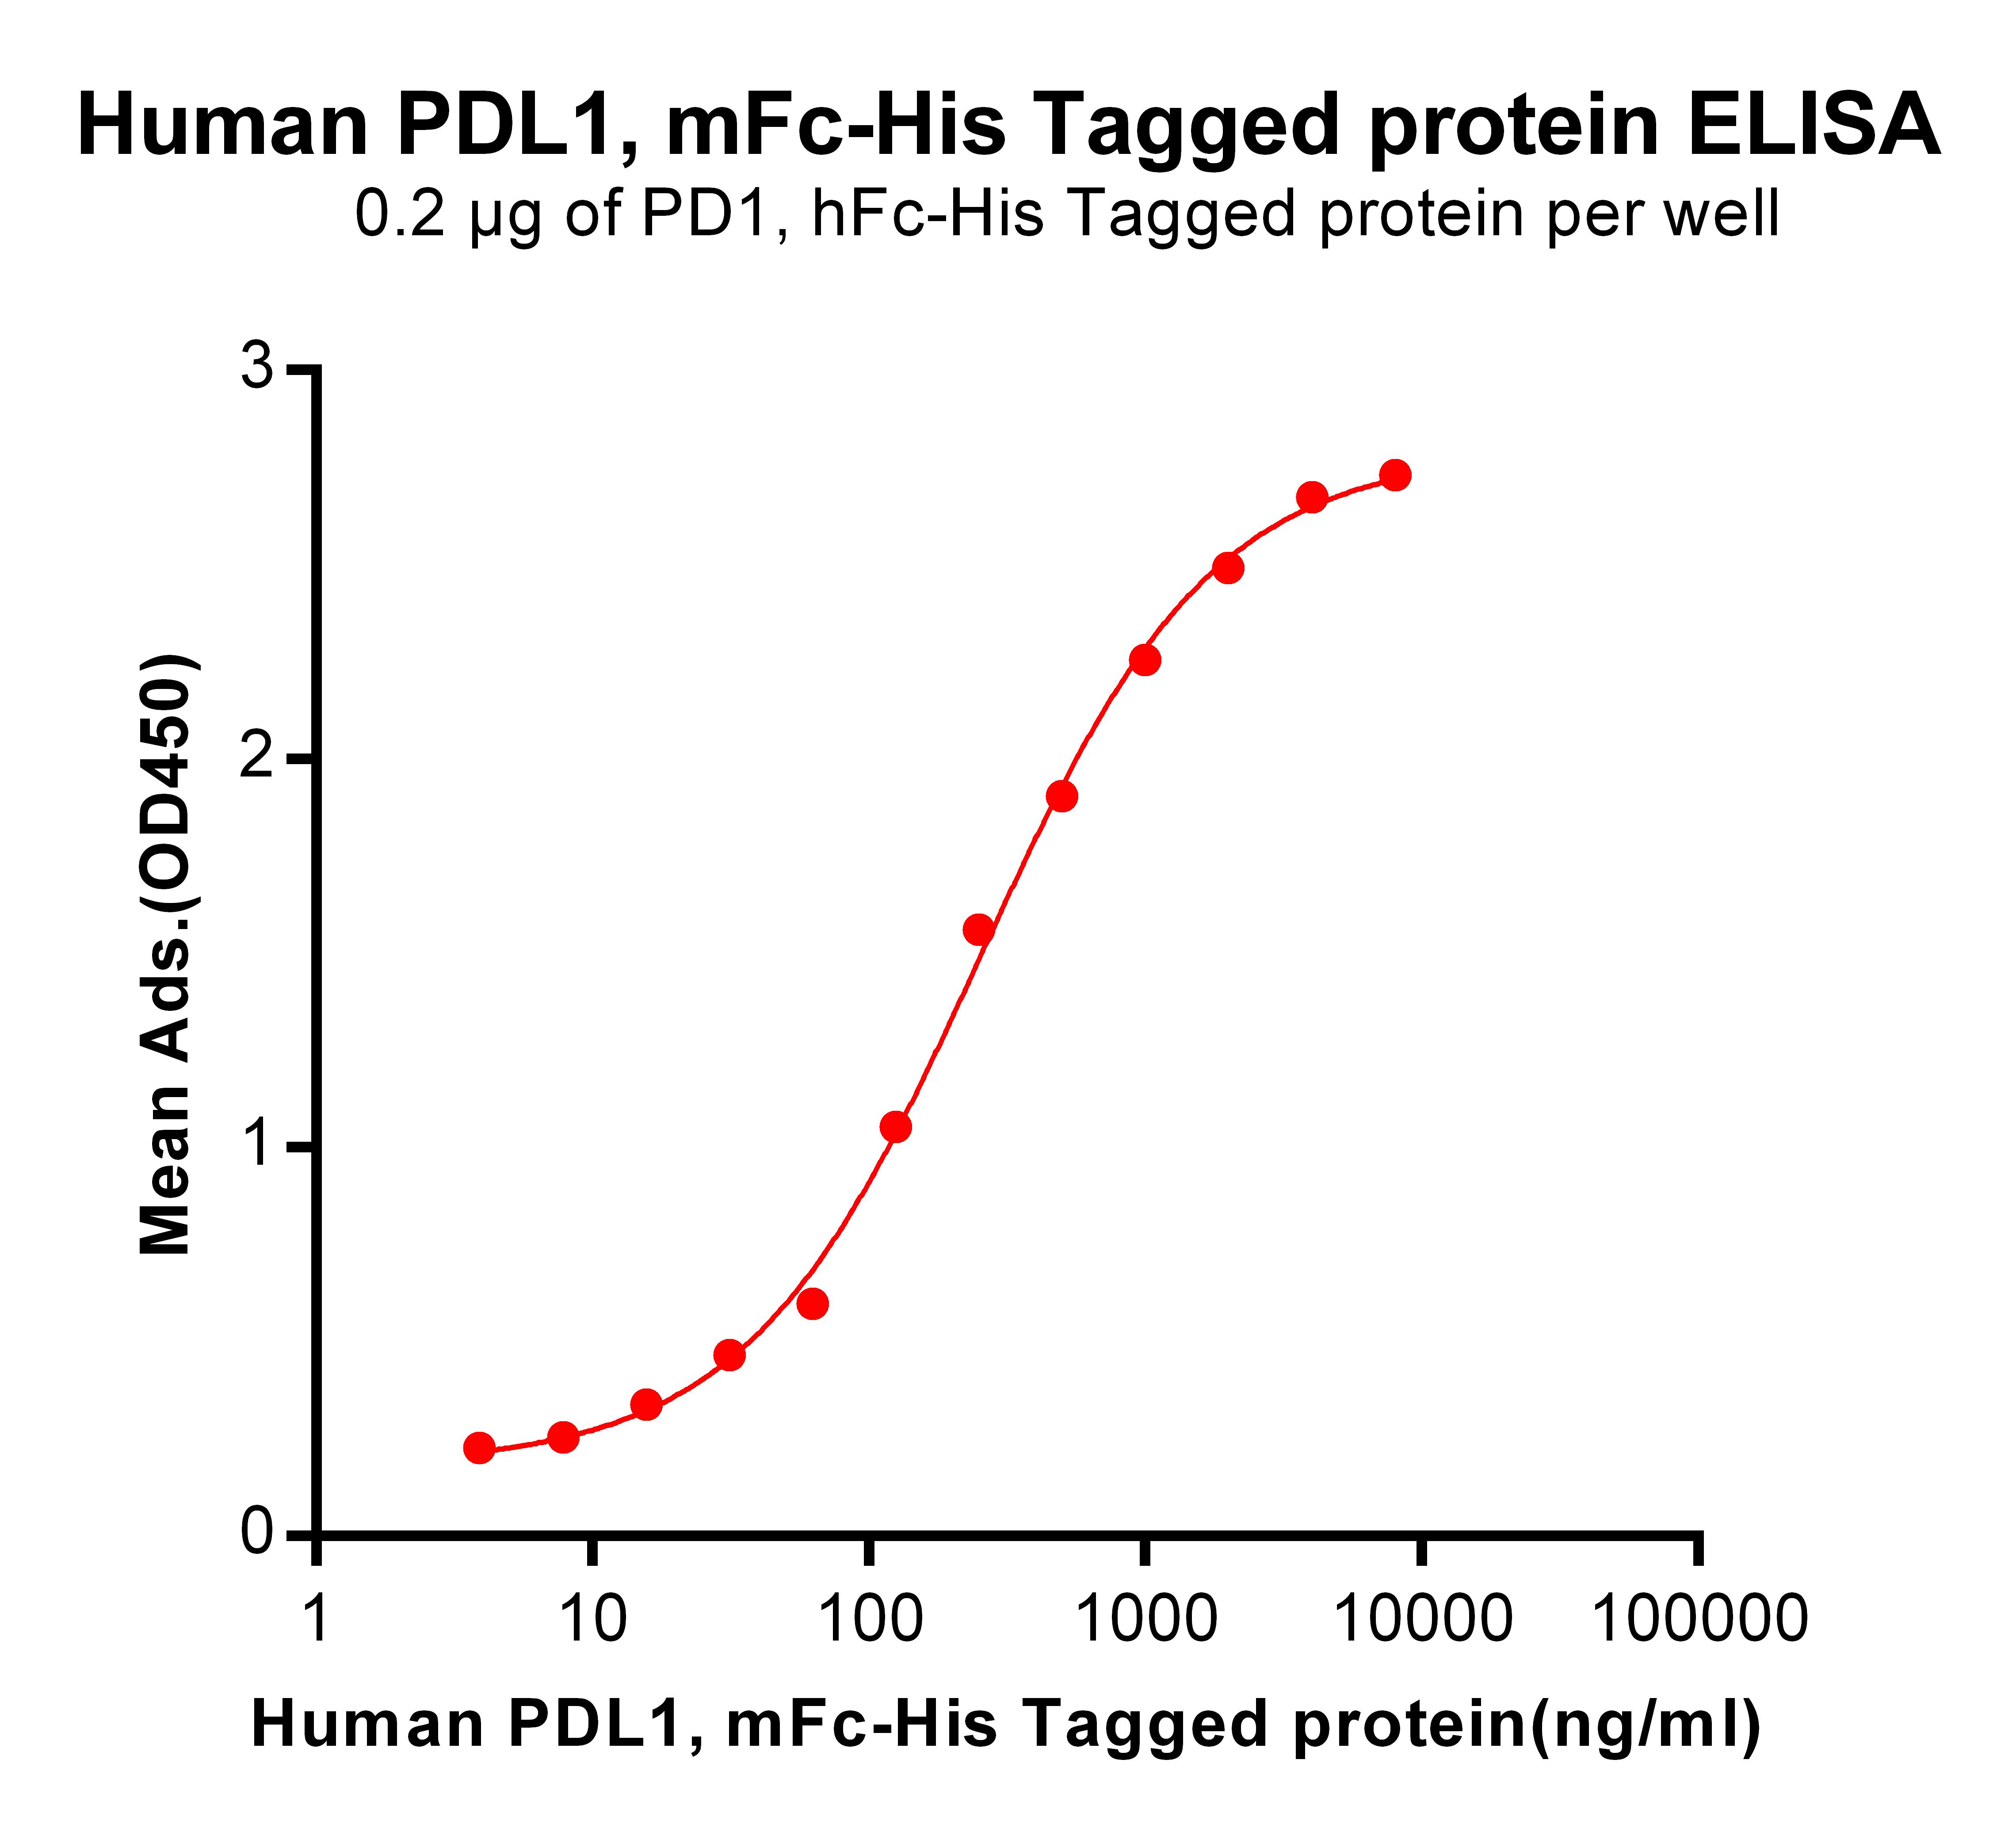 Figure 3. ELISA plate pre-coated by 2 µg/ml (100 µl/well) Human PD1, hFc-His tagged protein  can bind Human PDL1, mFc-His tagged protein  in a linear range of 62.5-251.1 ng/ml.